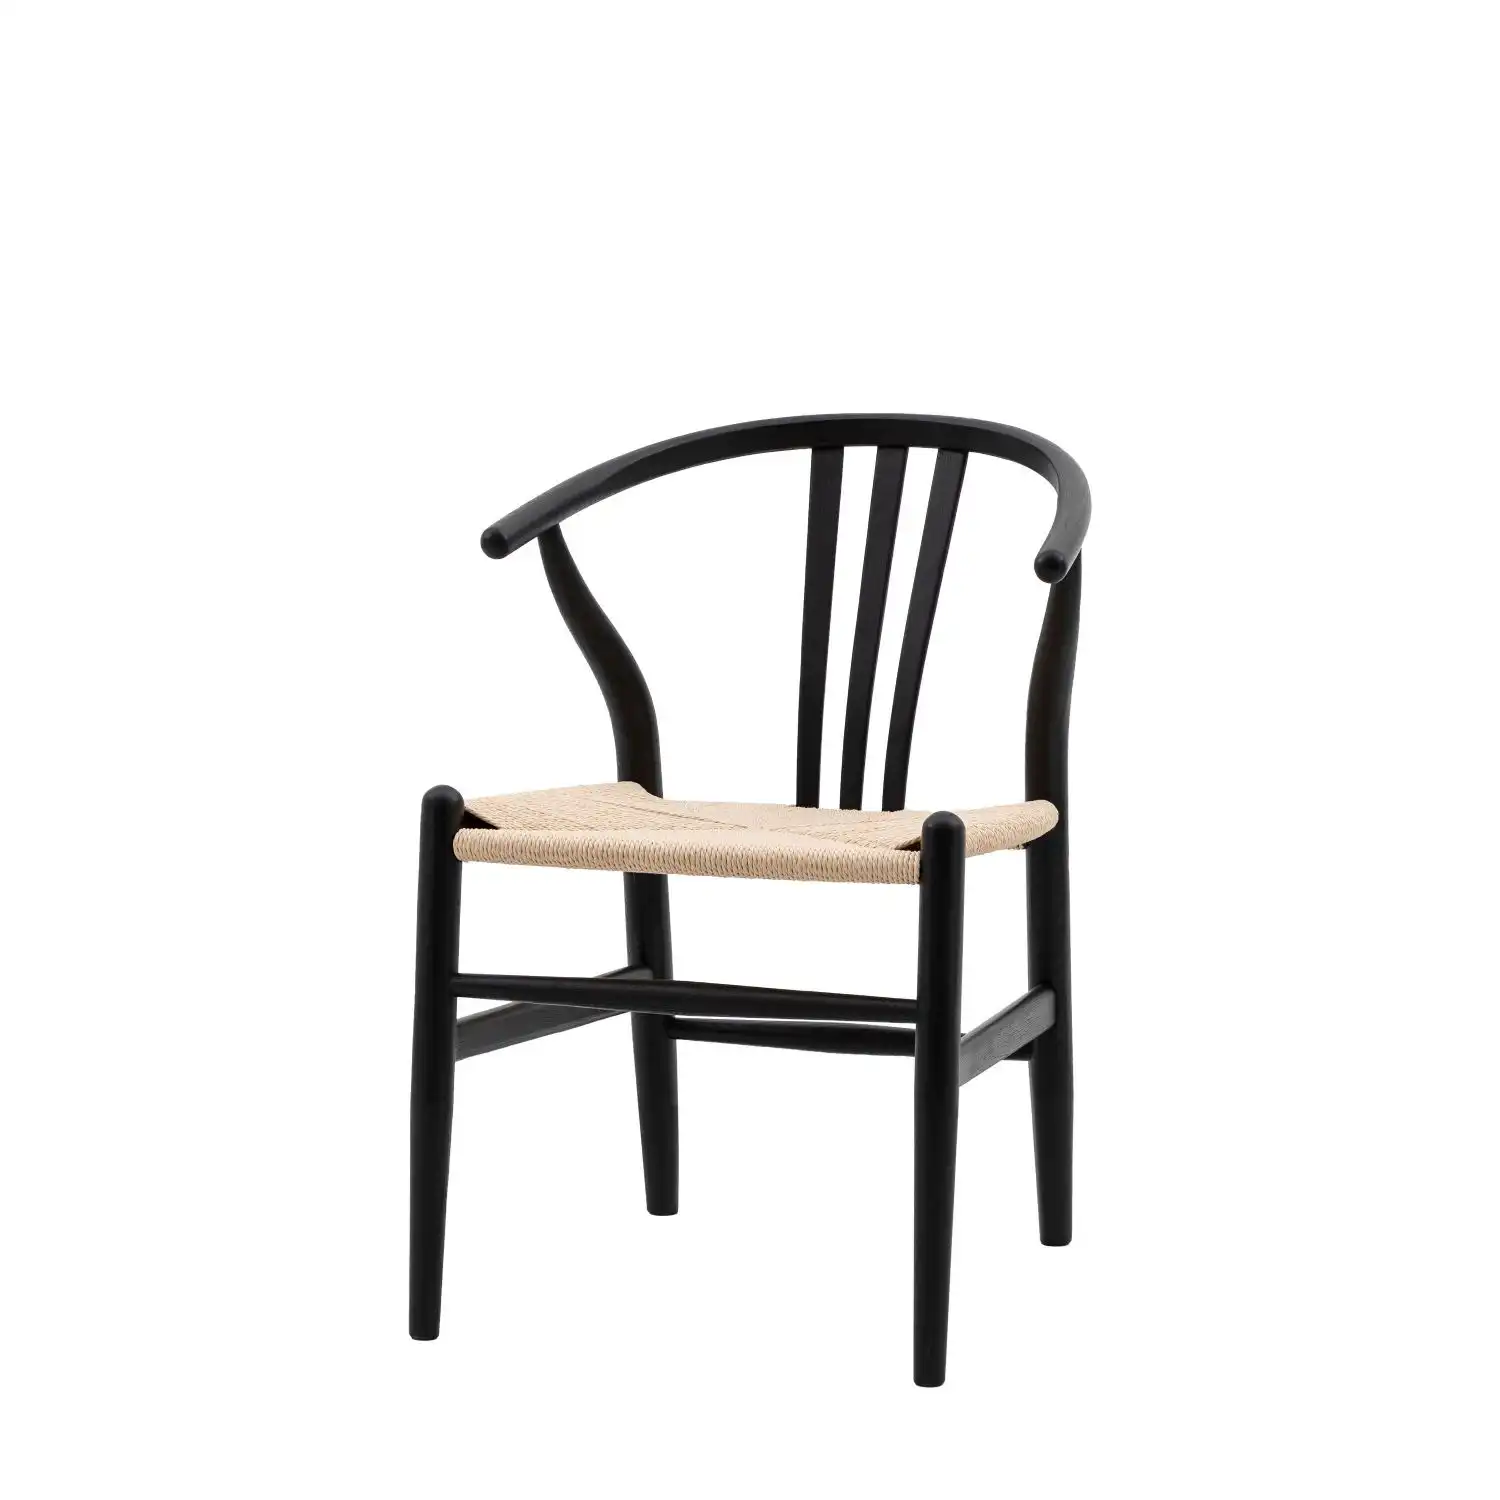 Vintage Black Wooden Carved Dining Chair with Hand Woven Seat